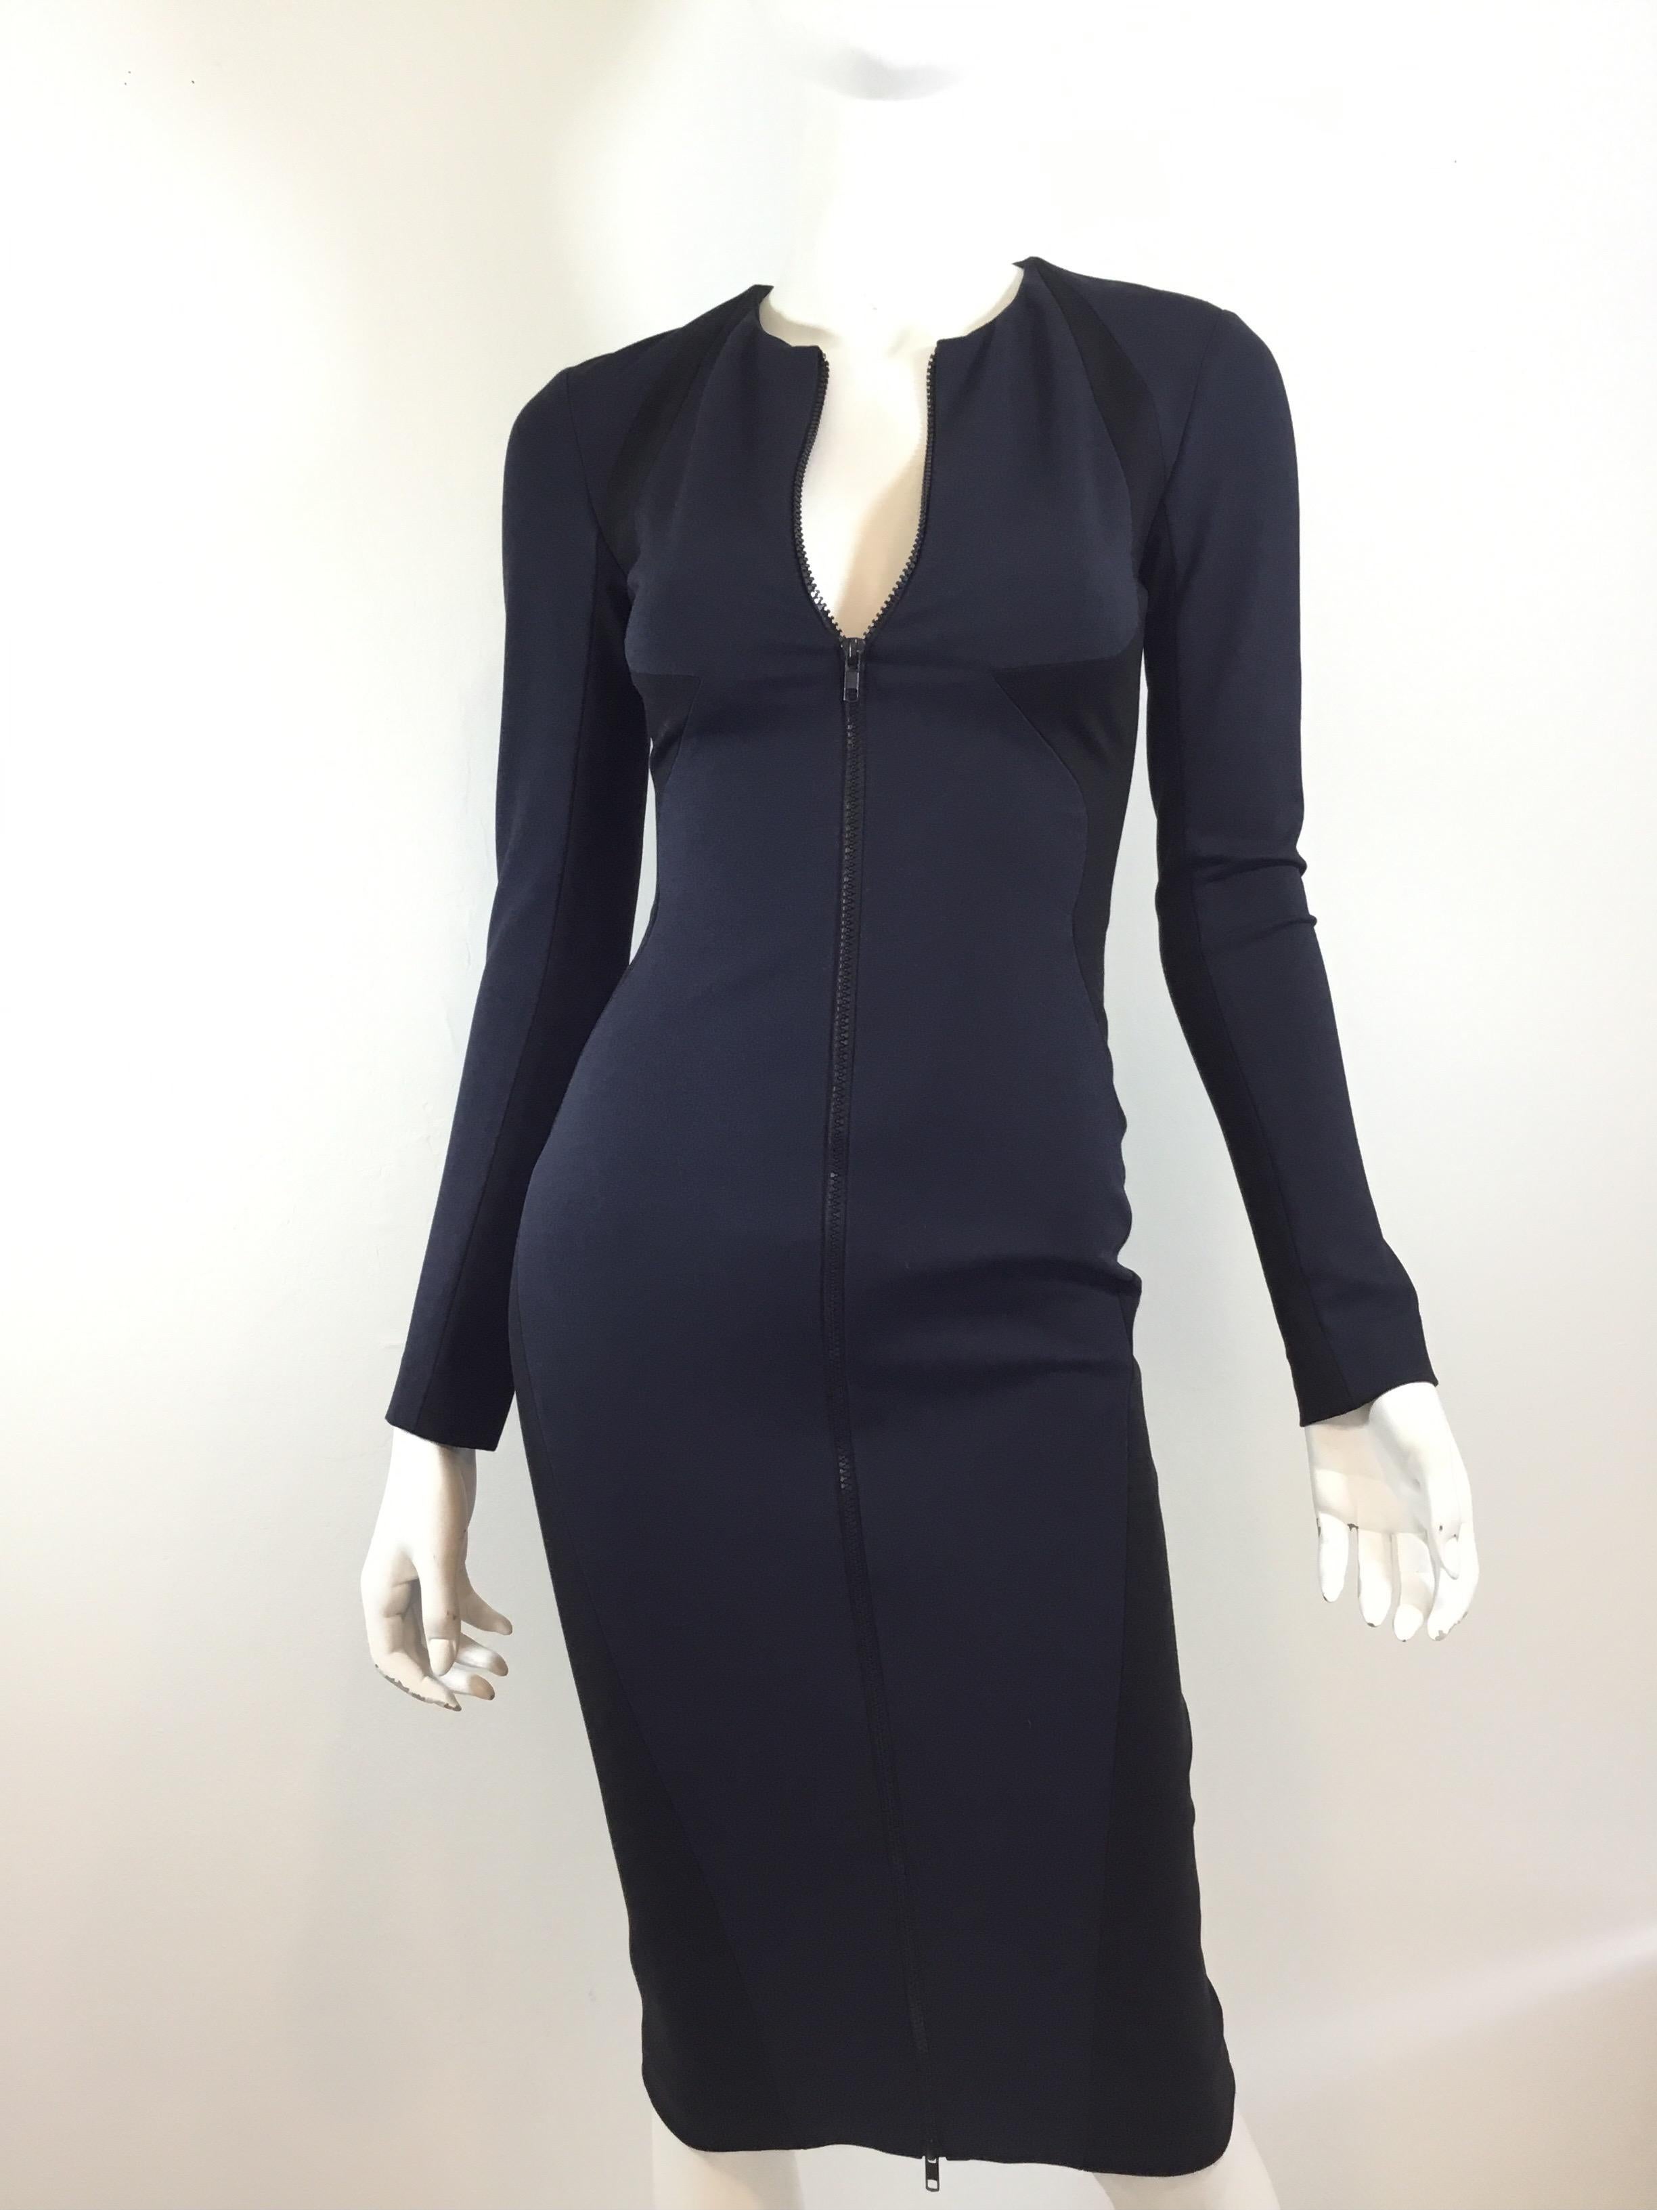 Cushnie Navy and Black Bodycon Dress with a full zippered front closure and a satin silk lining. Dress is a size 2. Excellent condition.

Bust 30''
Waist 34''
Hips 30''
Sleeves 20''
Length 41''
*stretchy fabric*